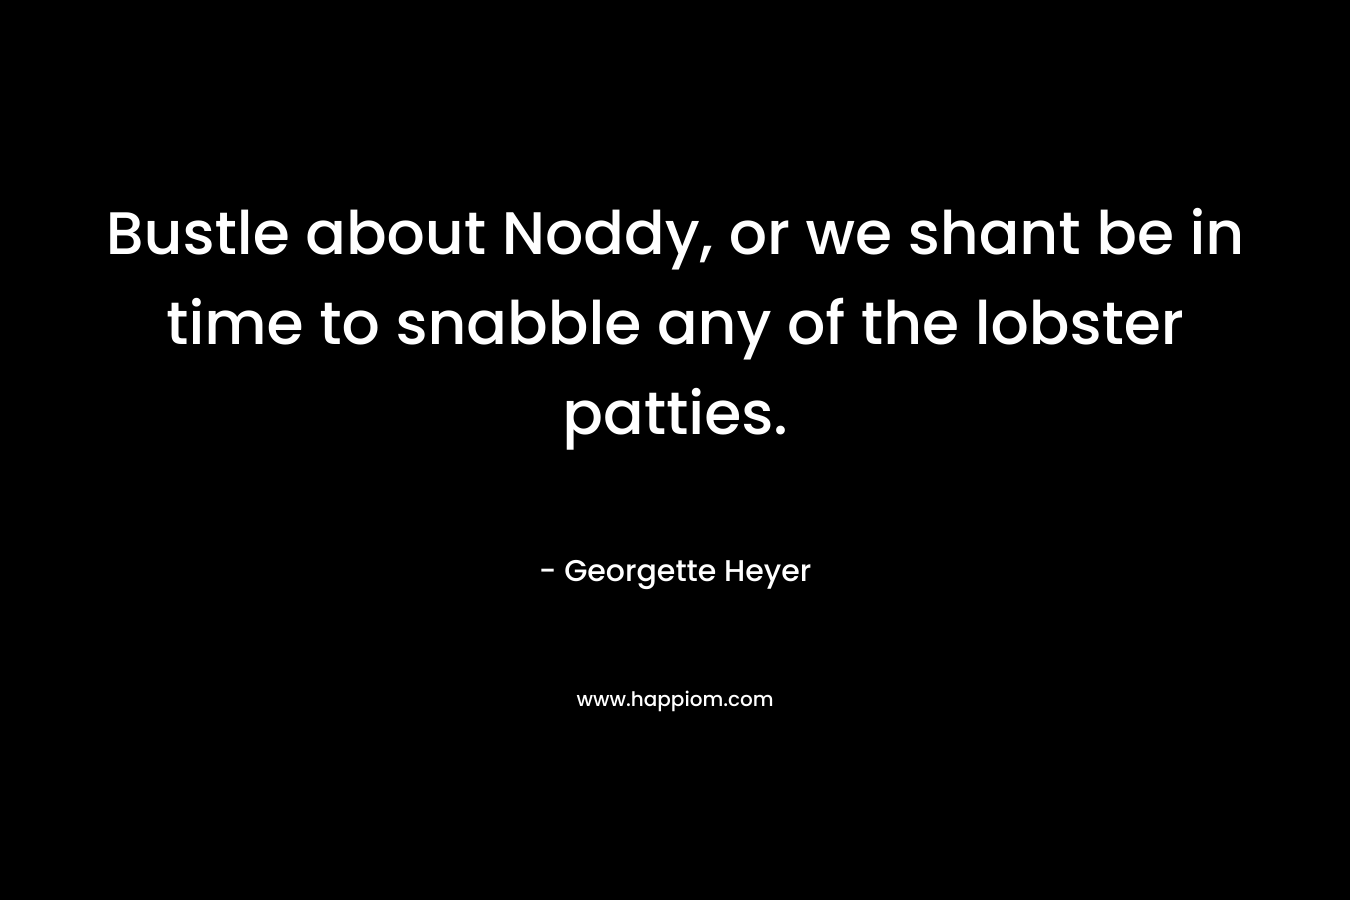 Bustle about Noddy, or we shant be in time to snabble any of the lobster patties.